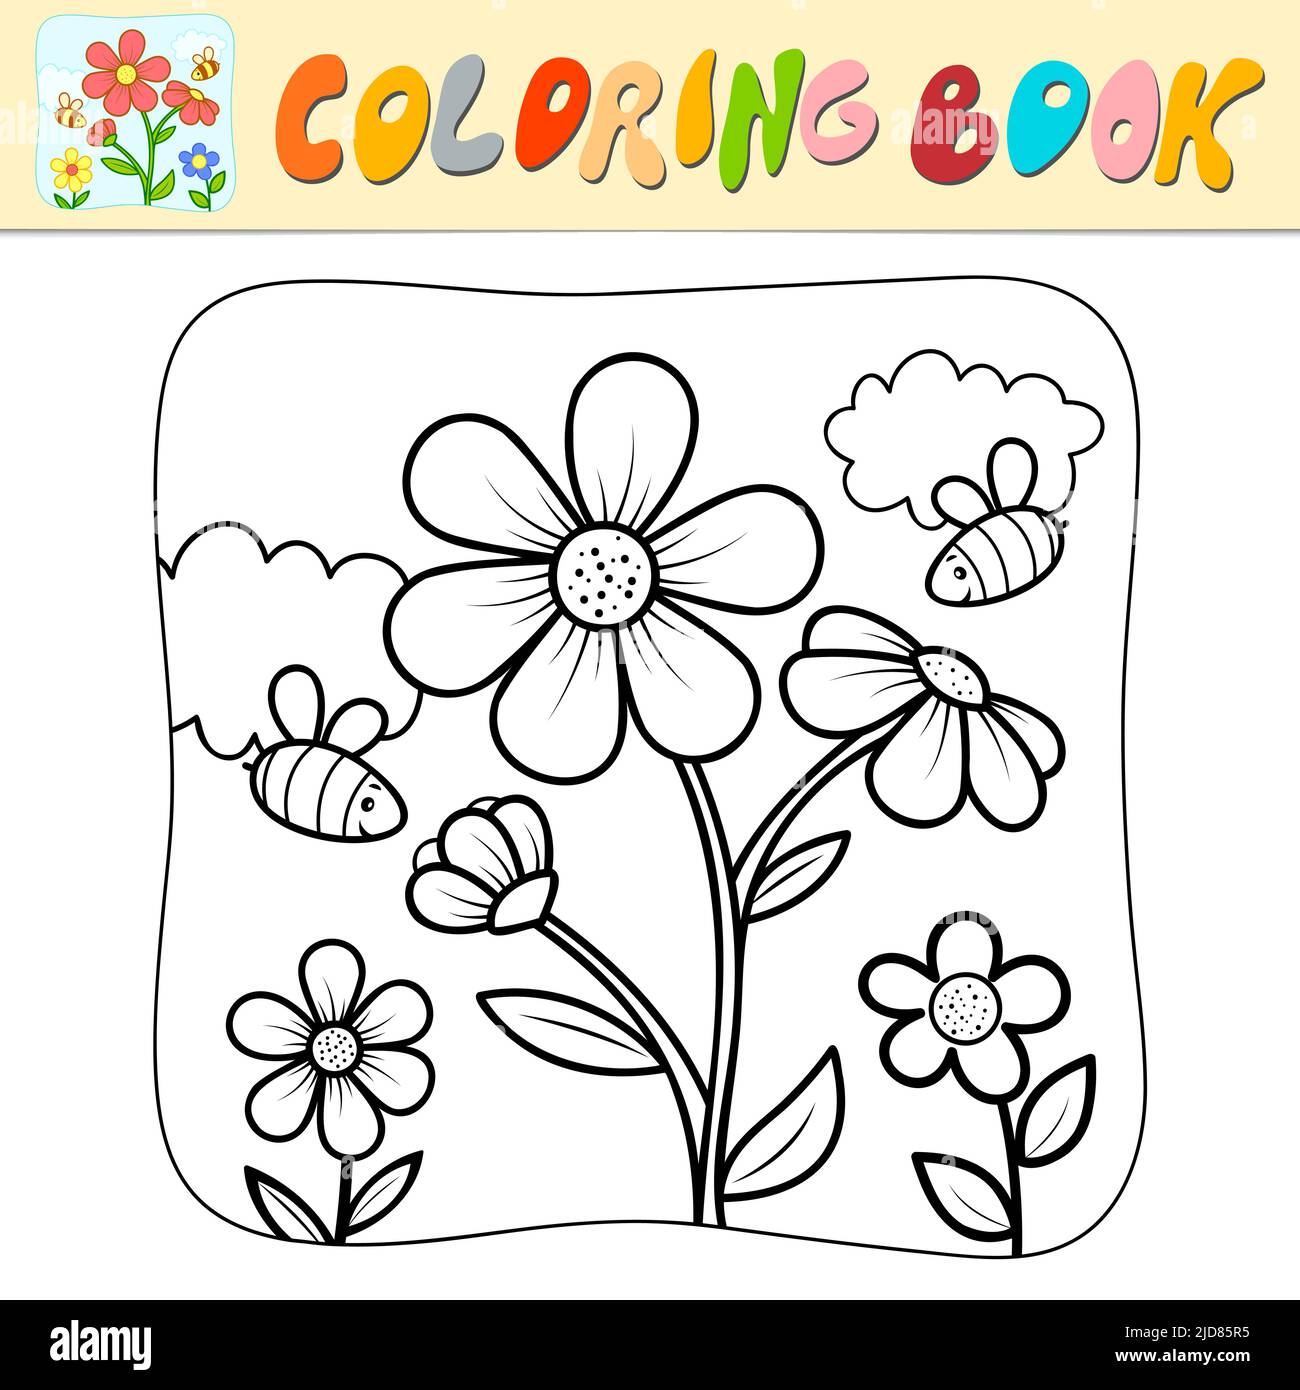 Coloring book or coloring page for kids flower and bees black and white vector illustration nature background stock vector image art